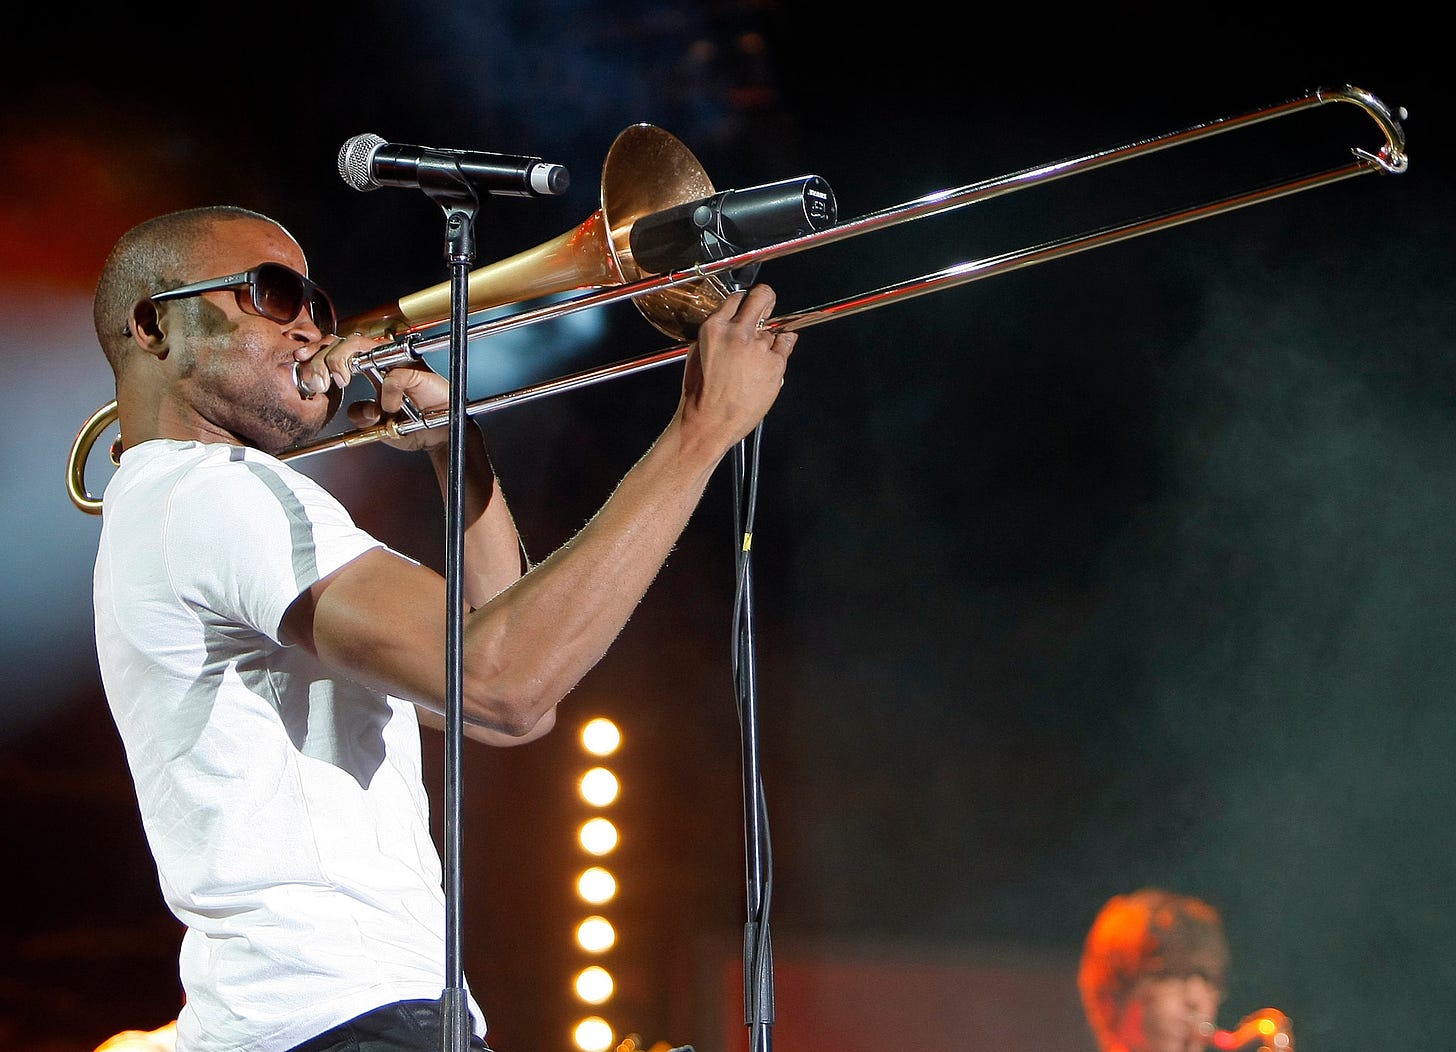 Trombone Shorty Helps a Young Victim - The New York Times